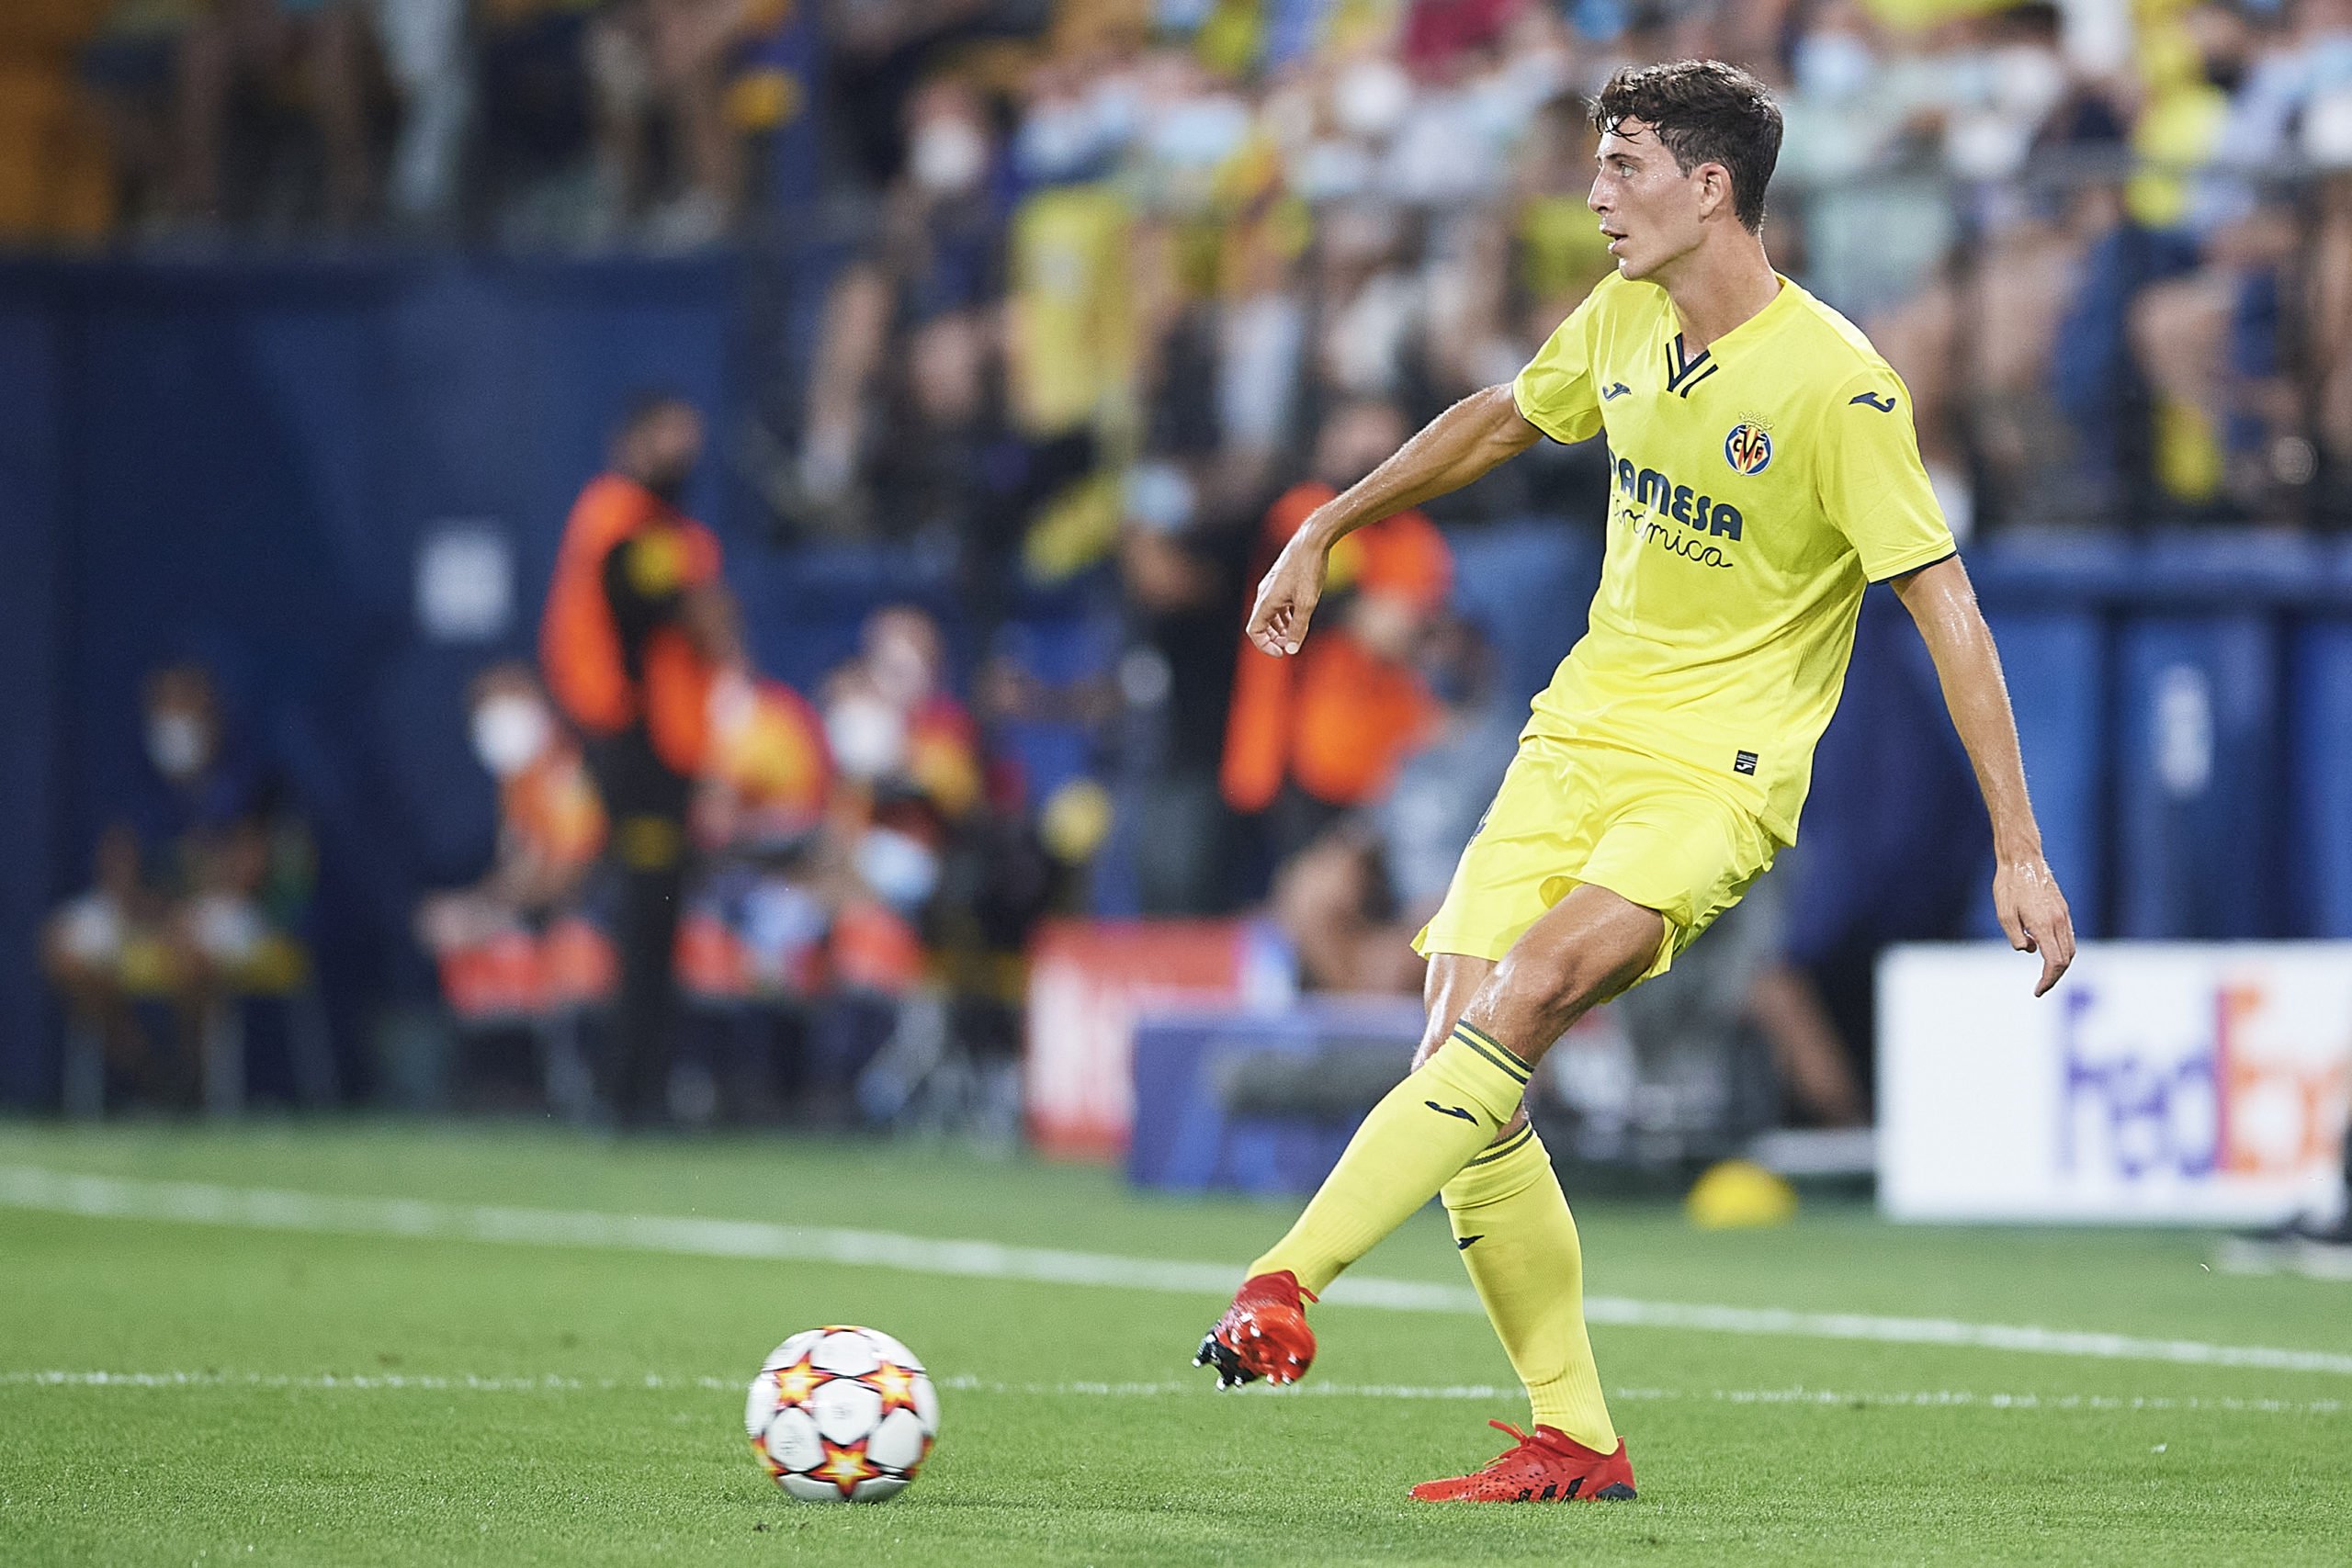 VILLARREAL, SPAIN - SEPTEMBER 14: Pau Torres of Villarreal in action during the UEFA Champions League group F match between Villarreal CF and Atalanta at Estadio de la Ceramica on September 14, 2021 in Villarreal, Spain. (Photo by Aitor Alcalde/Getty Images)The 4th Official uses images provided by the following image agency: Getty Images (https://www.gettyimages.de/) Imago Images (https://www.imago-images.de/)